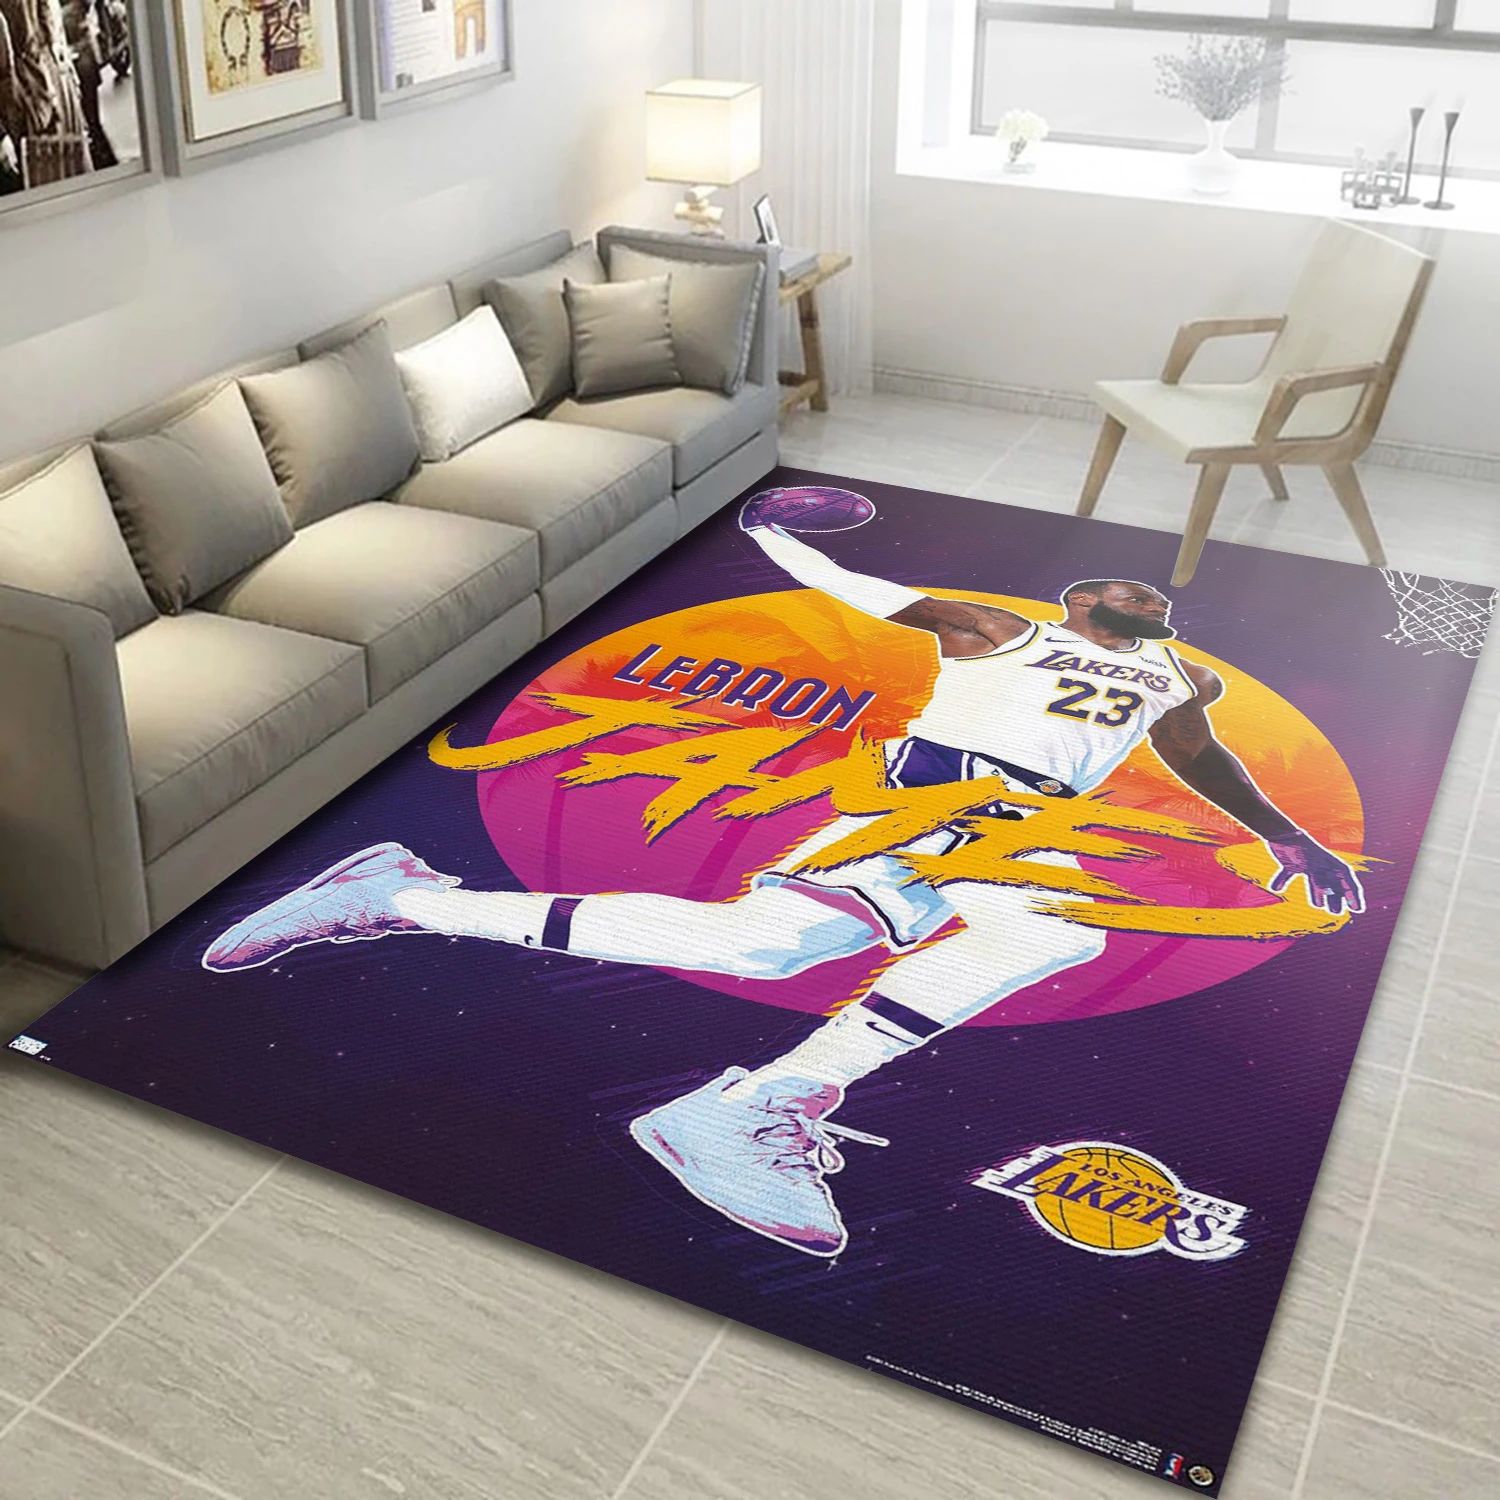 Lebron James Los Angeles Lakers NBA Area Rug For Christmas, Living Room Rug - Room Decor - Indoor Outdoor Rugs 1